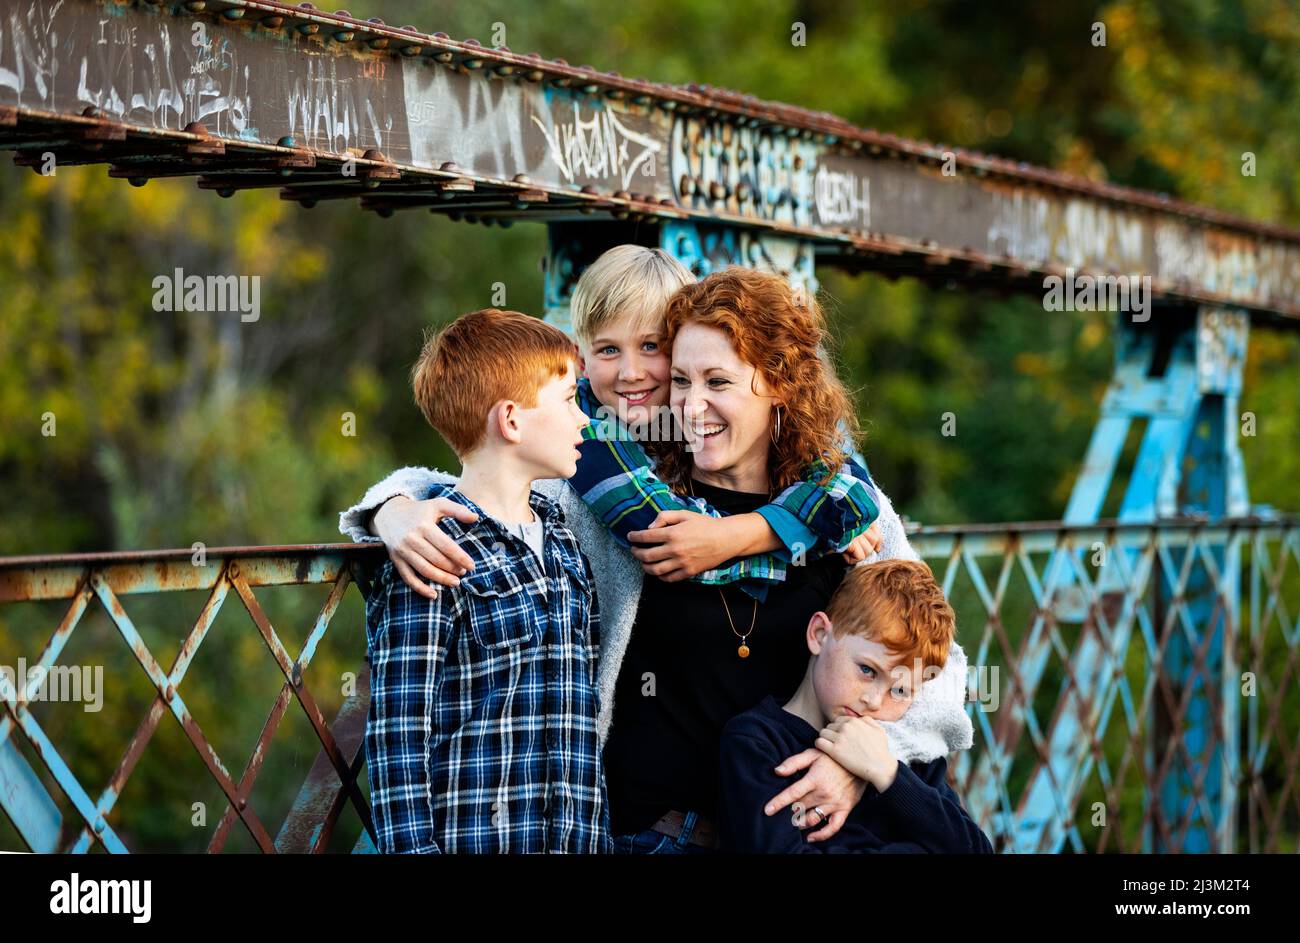 Mother with three boys standing on a bridge in a park in autumn; Edmonton, Alberta, Canada Stock Photo